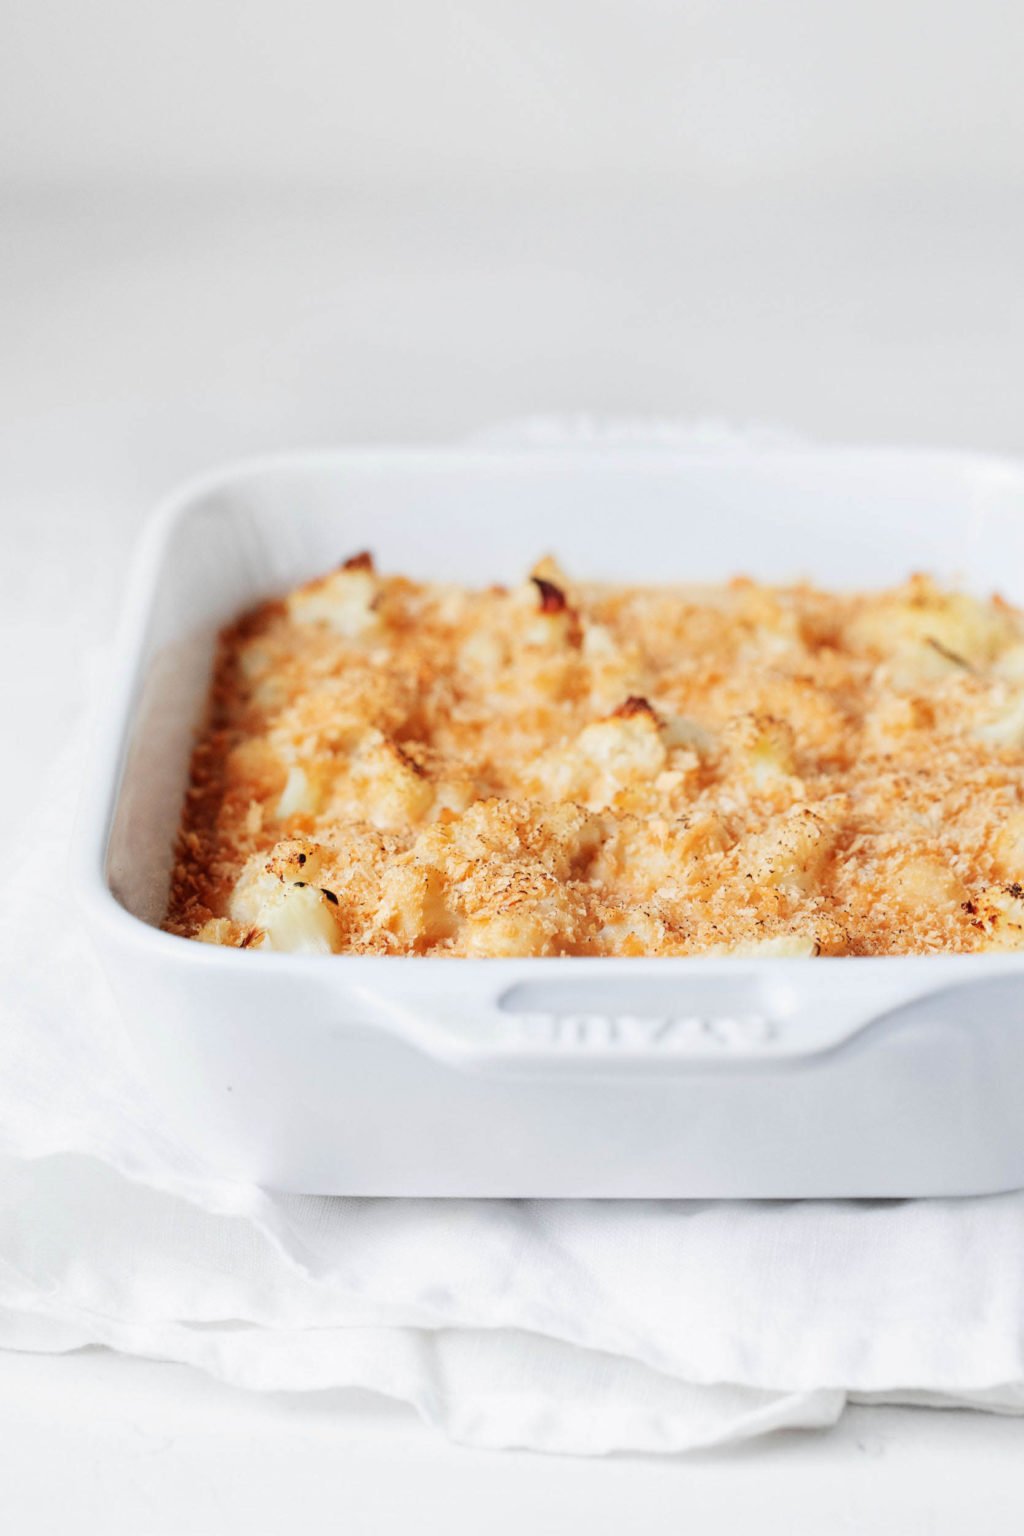 A white, rectangular baking dish has been filled with a cauliflower gratin and topped with breadcrumbs. It rests on a white cloth against a white surface.